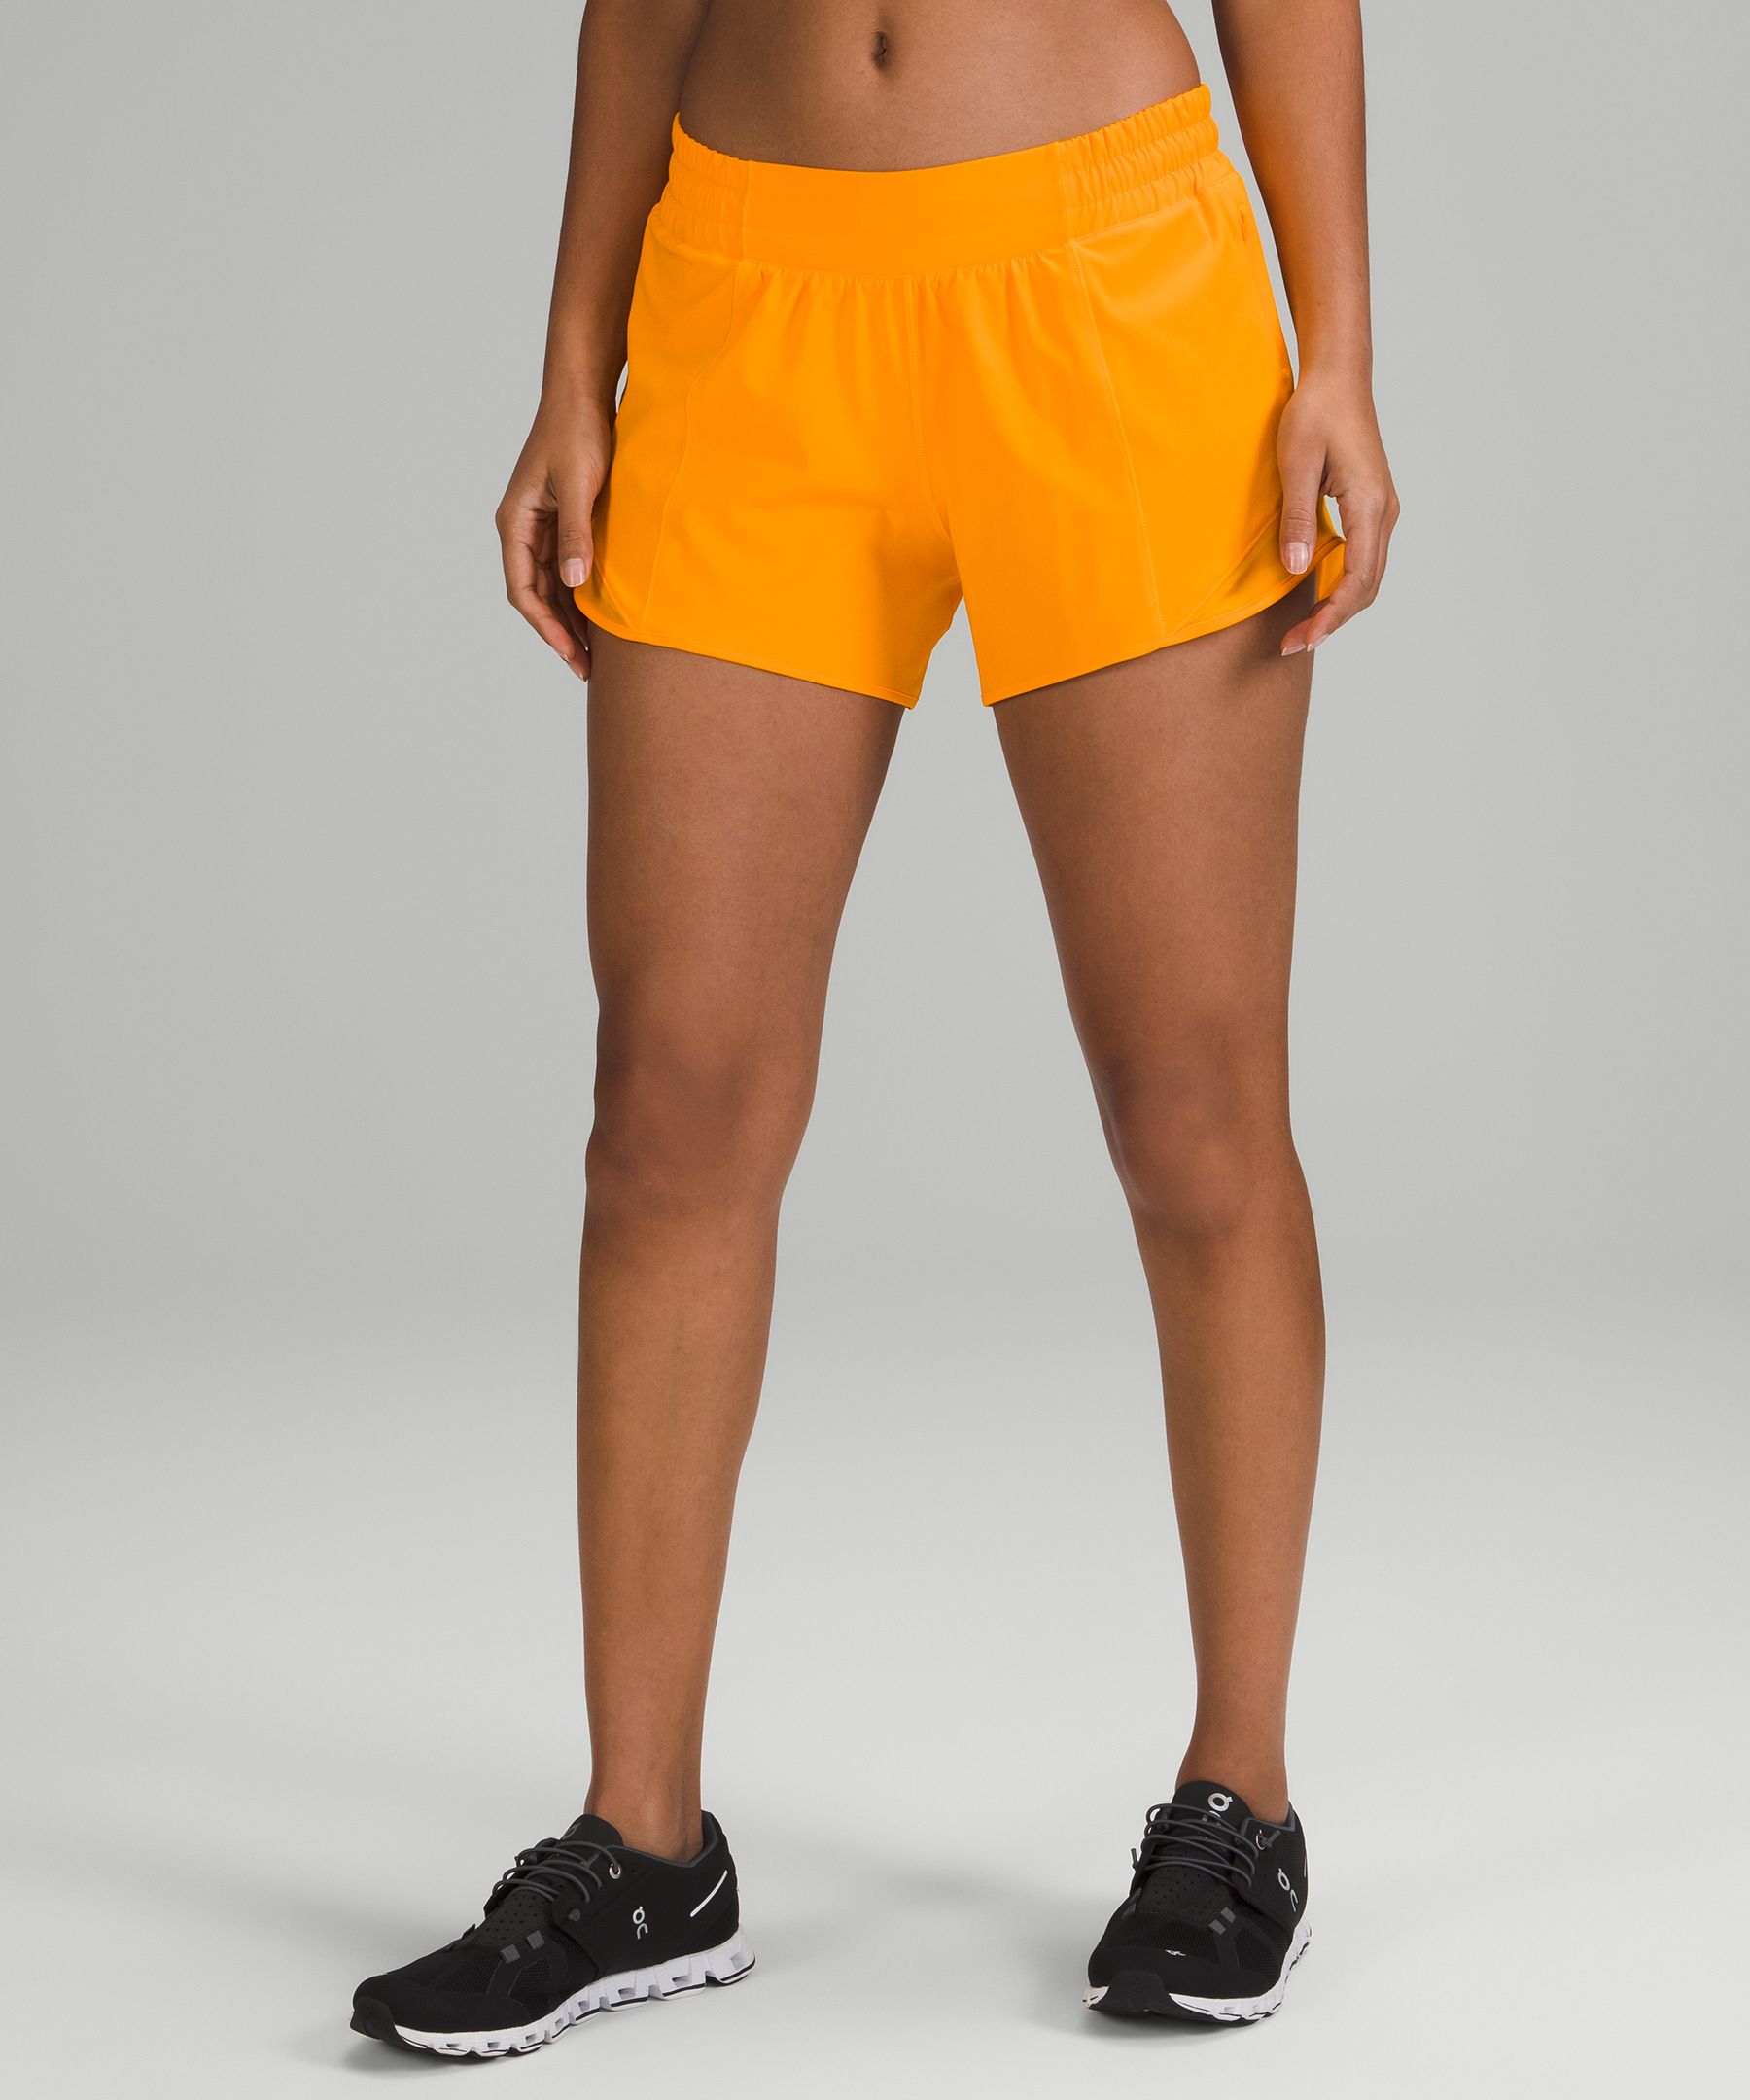 Lululemon Hotty Hot Low-rise Lined Shorts 4" In Clementine